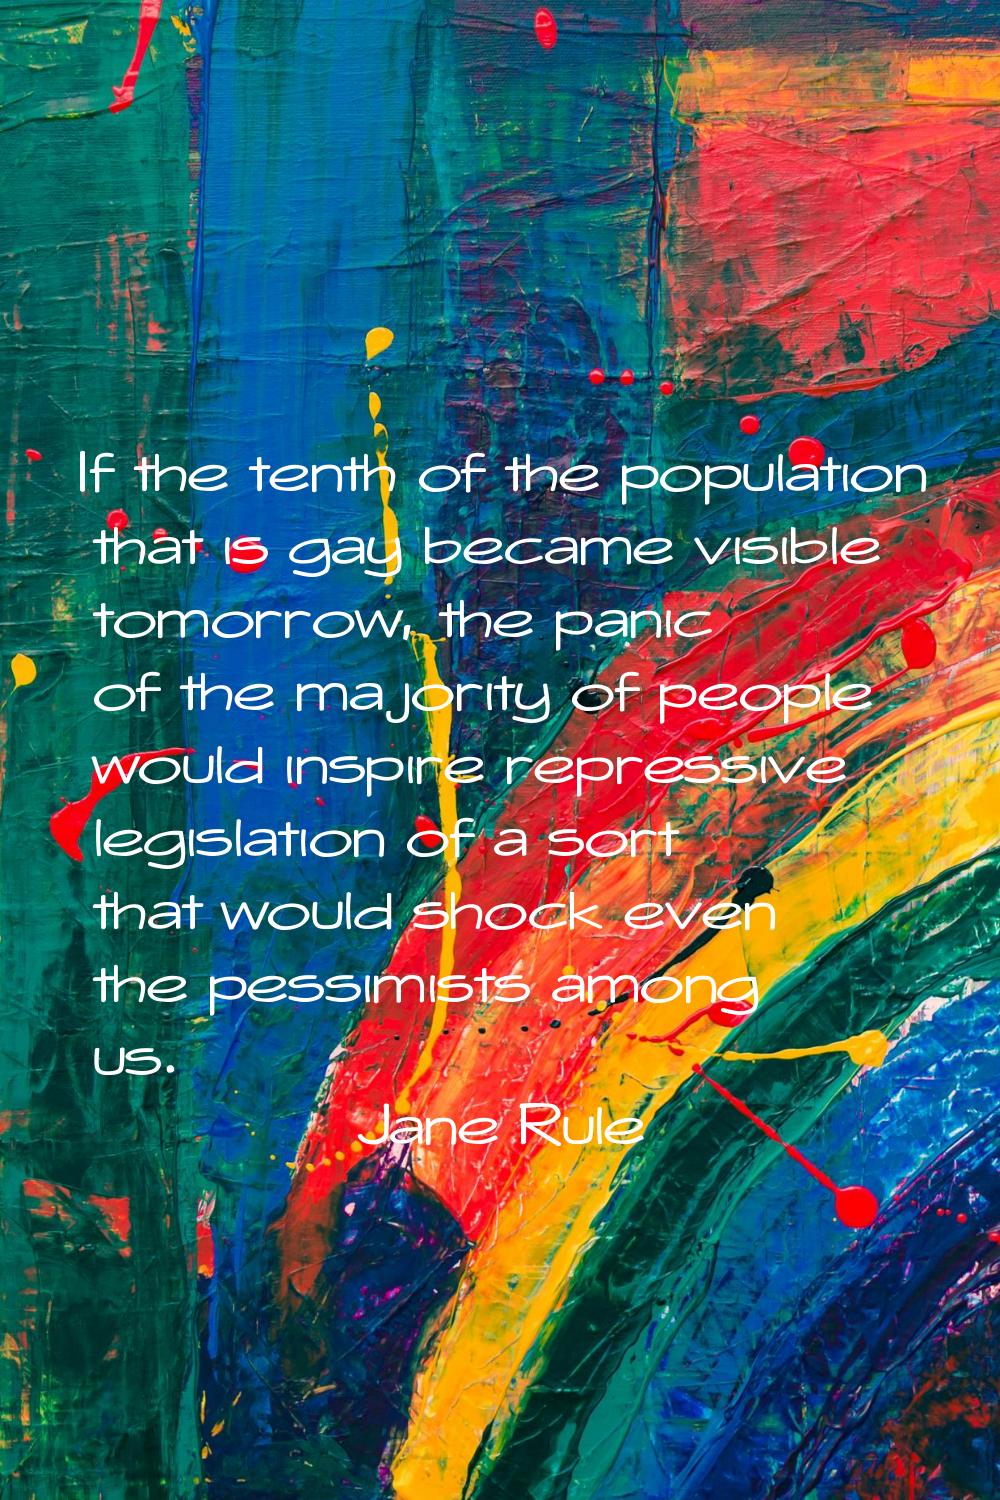 If the tenth of the population that is gay became visible tomorrow, the panic of the majority of pe